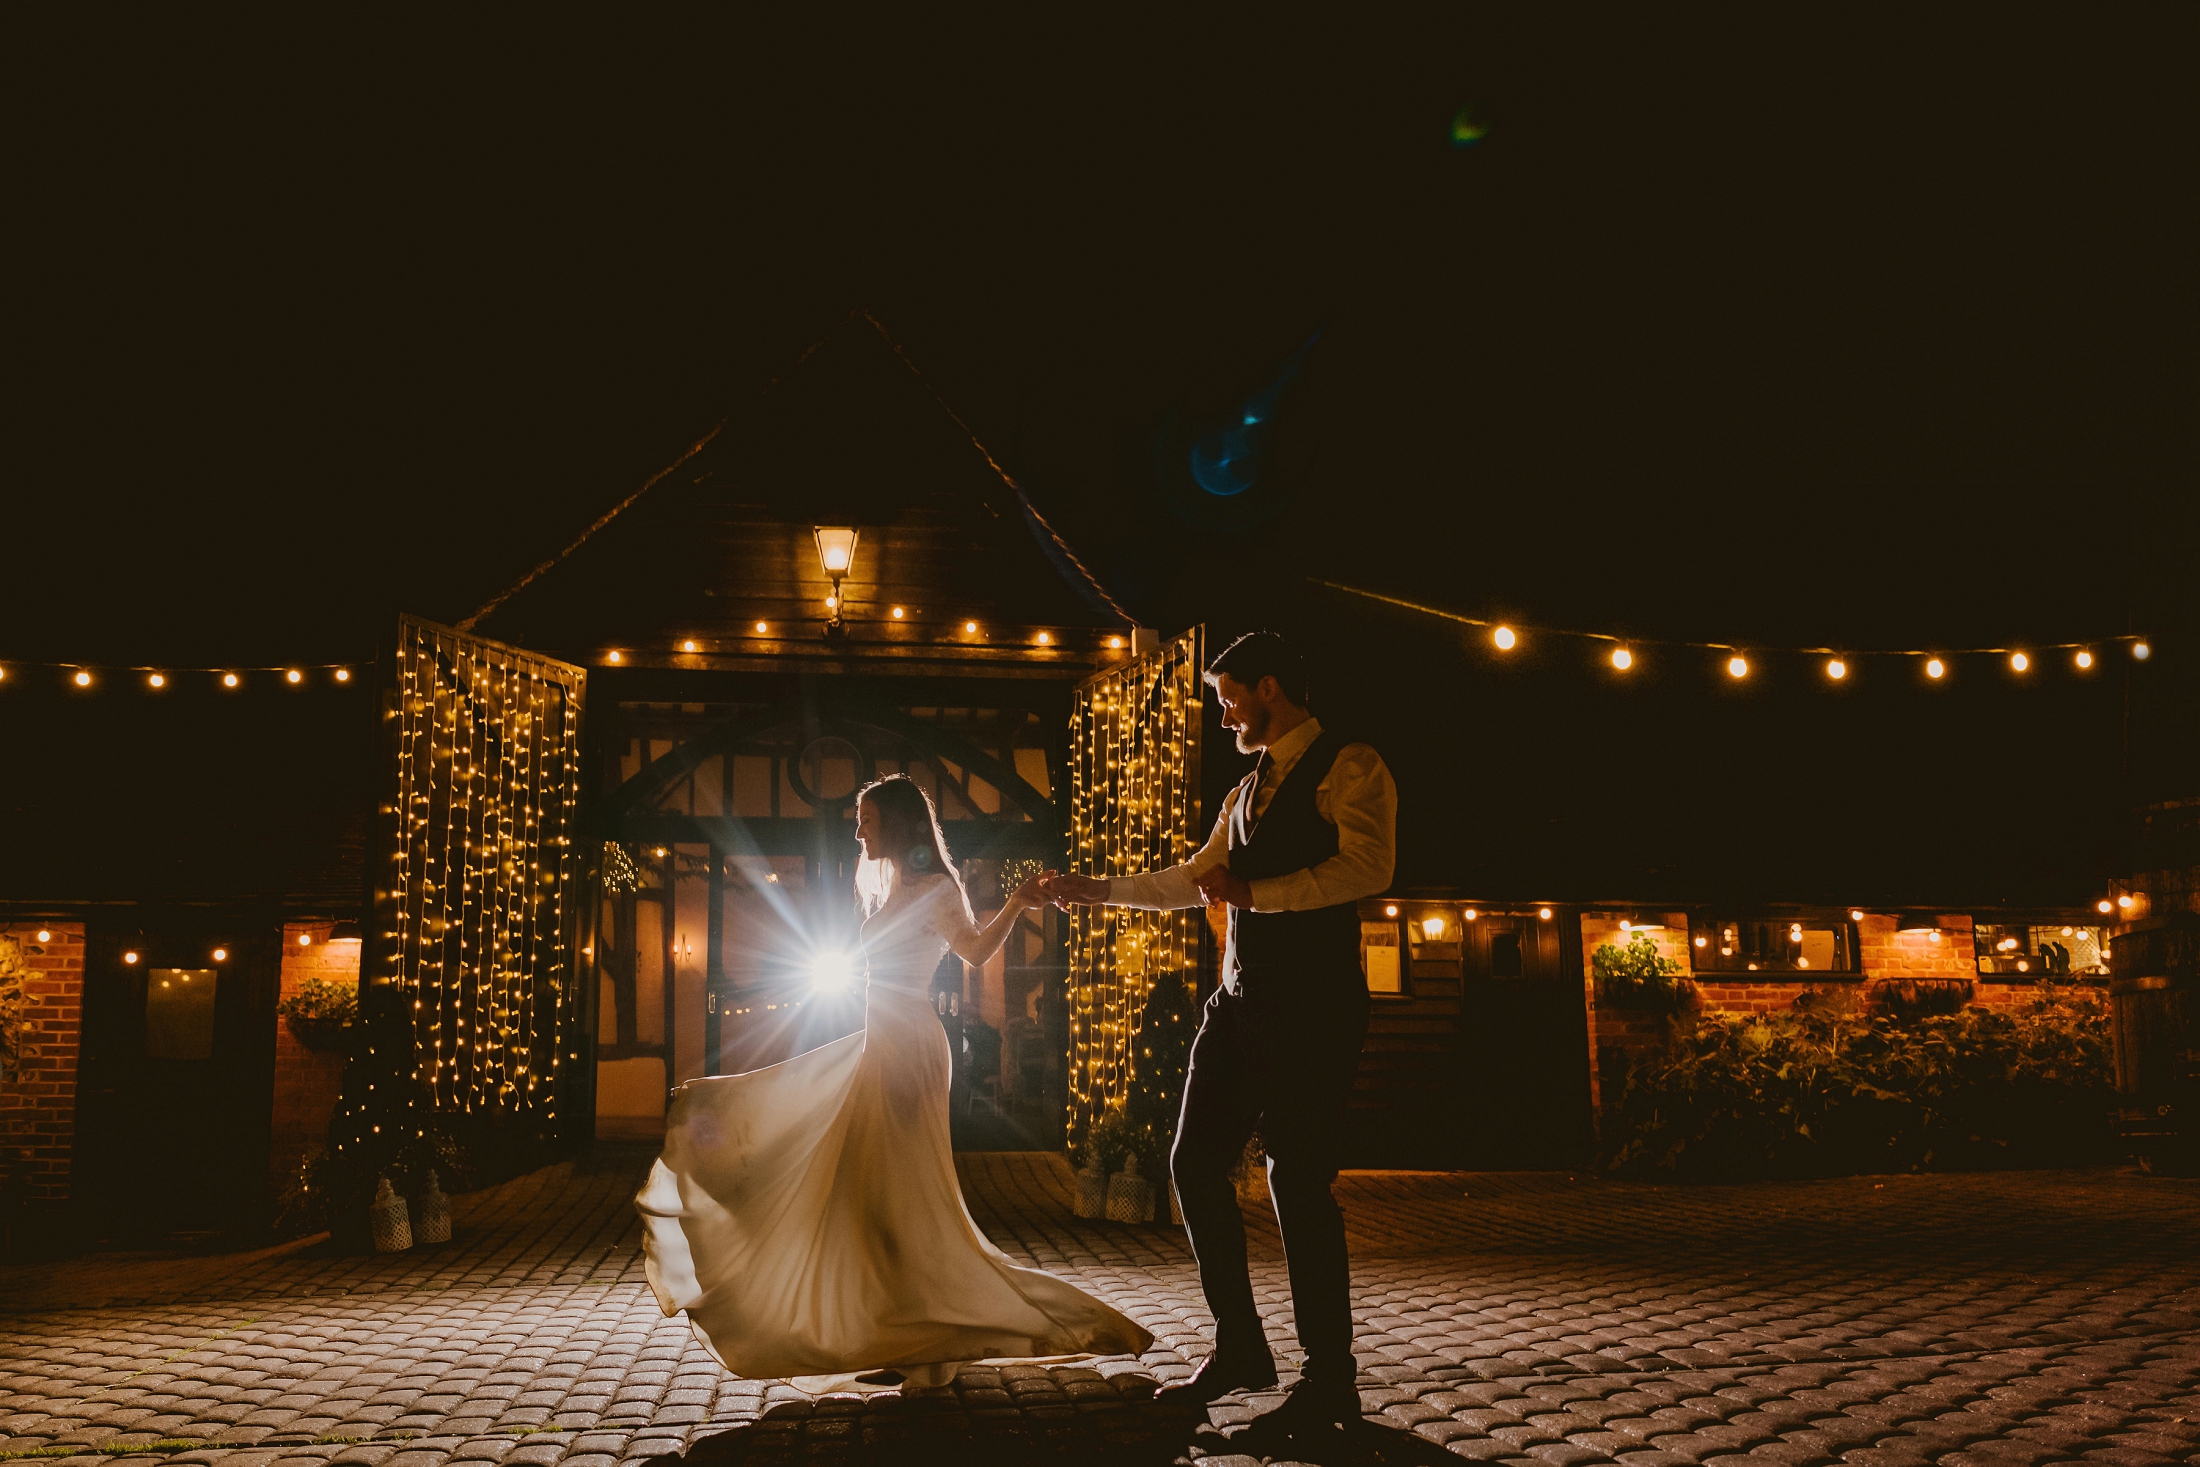 Bride and Groom dancing at Old Luxters Barn at nighttime - Buckinghamshire Wedding Photographer